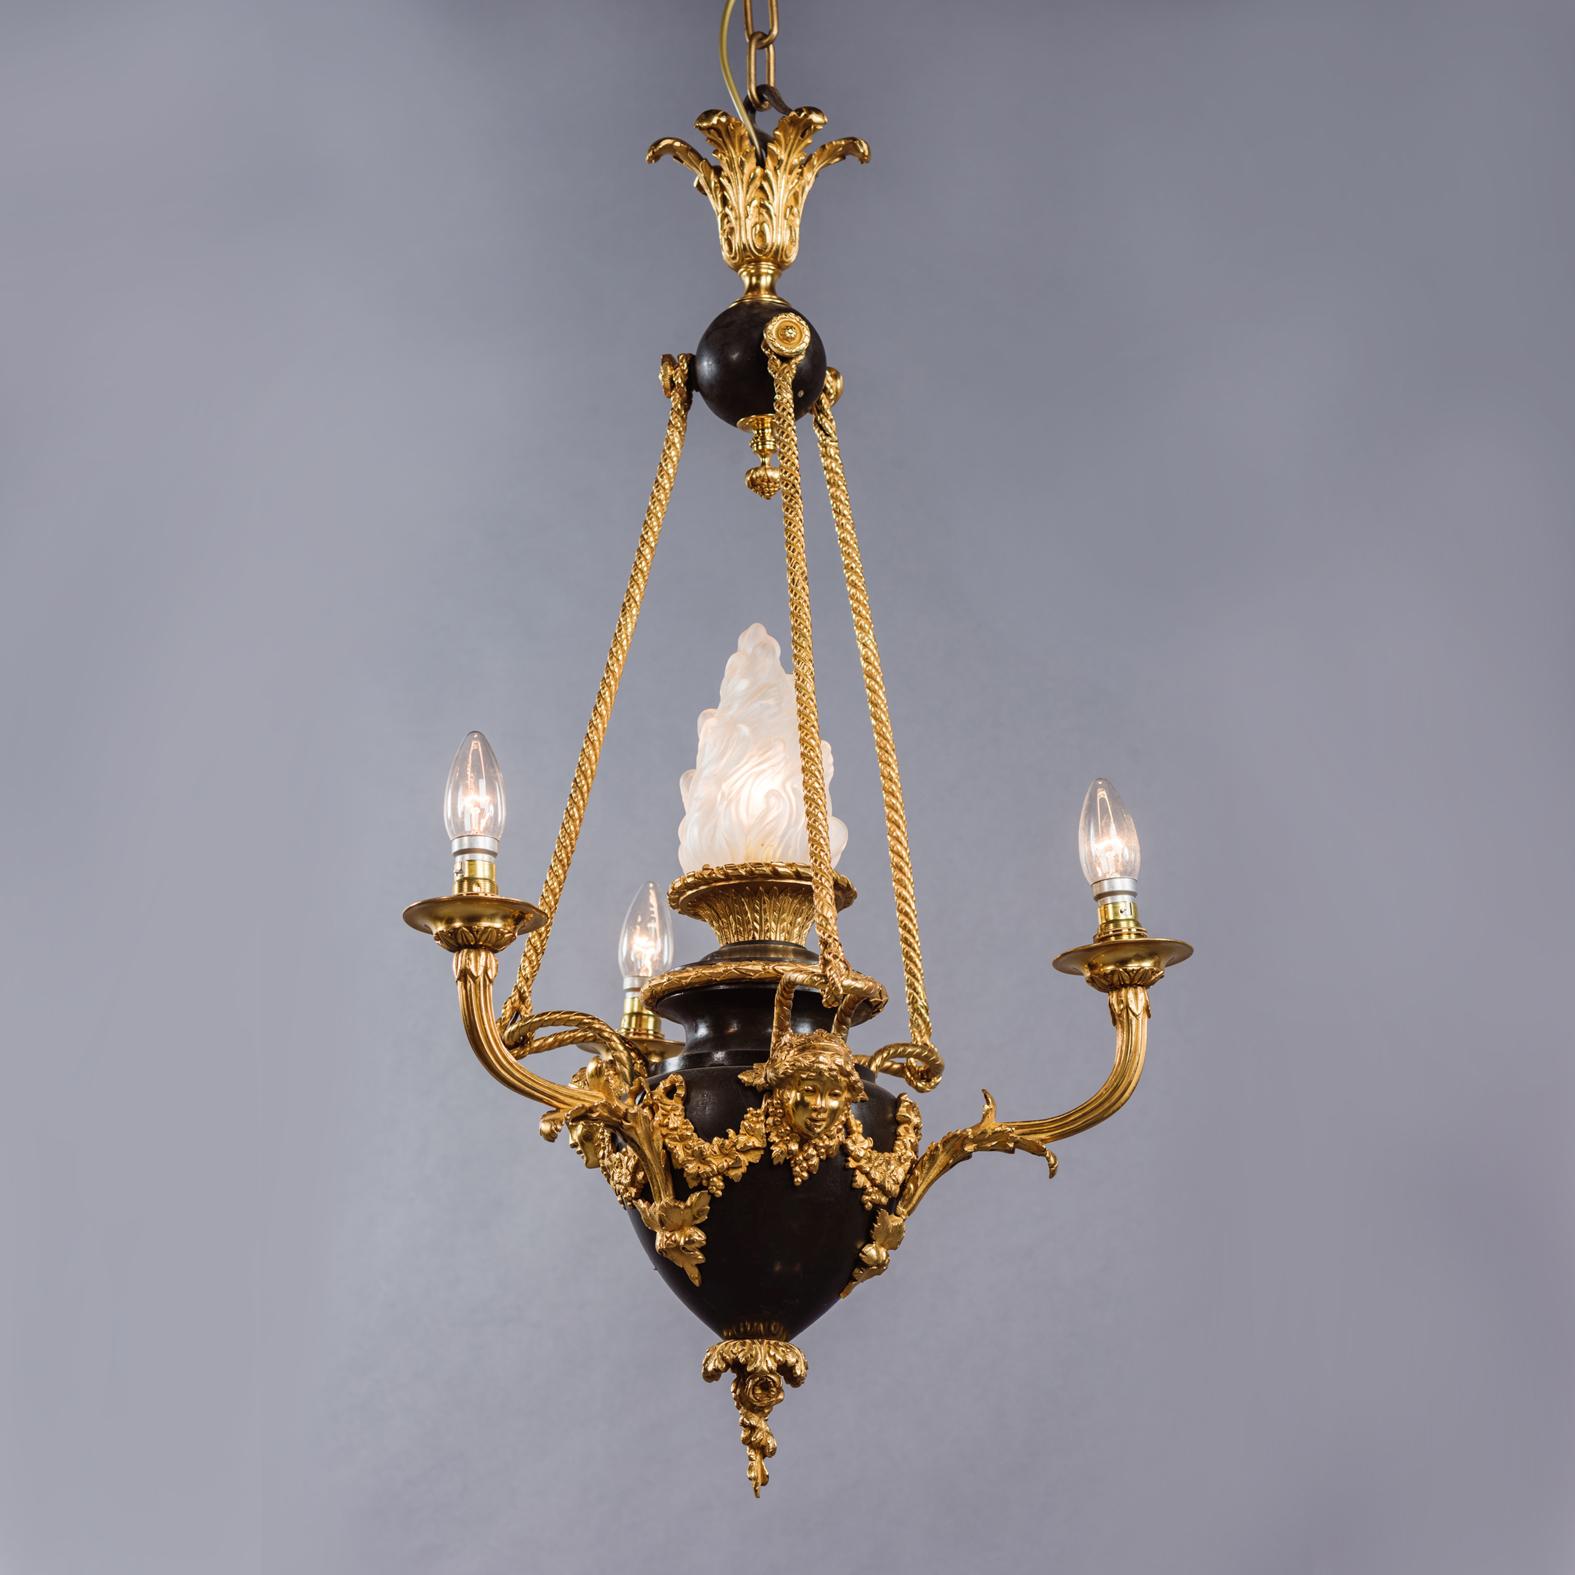 A Louis XVI Style Gilt and Patinated Bronze Four-Light Chandelier. 

The chandelier has a gilt-bronze acanthus cast corona above a patinated orb, with writhen suspensions rods suspending a patinated bronze urn embellished with gilt-bronze masks and